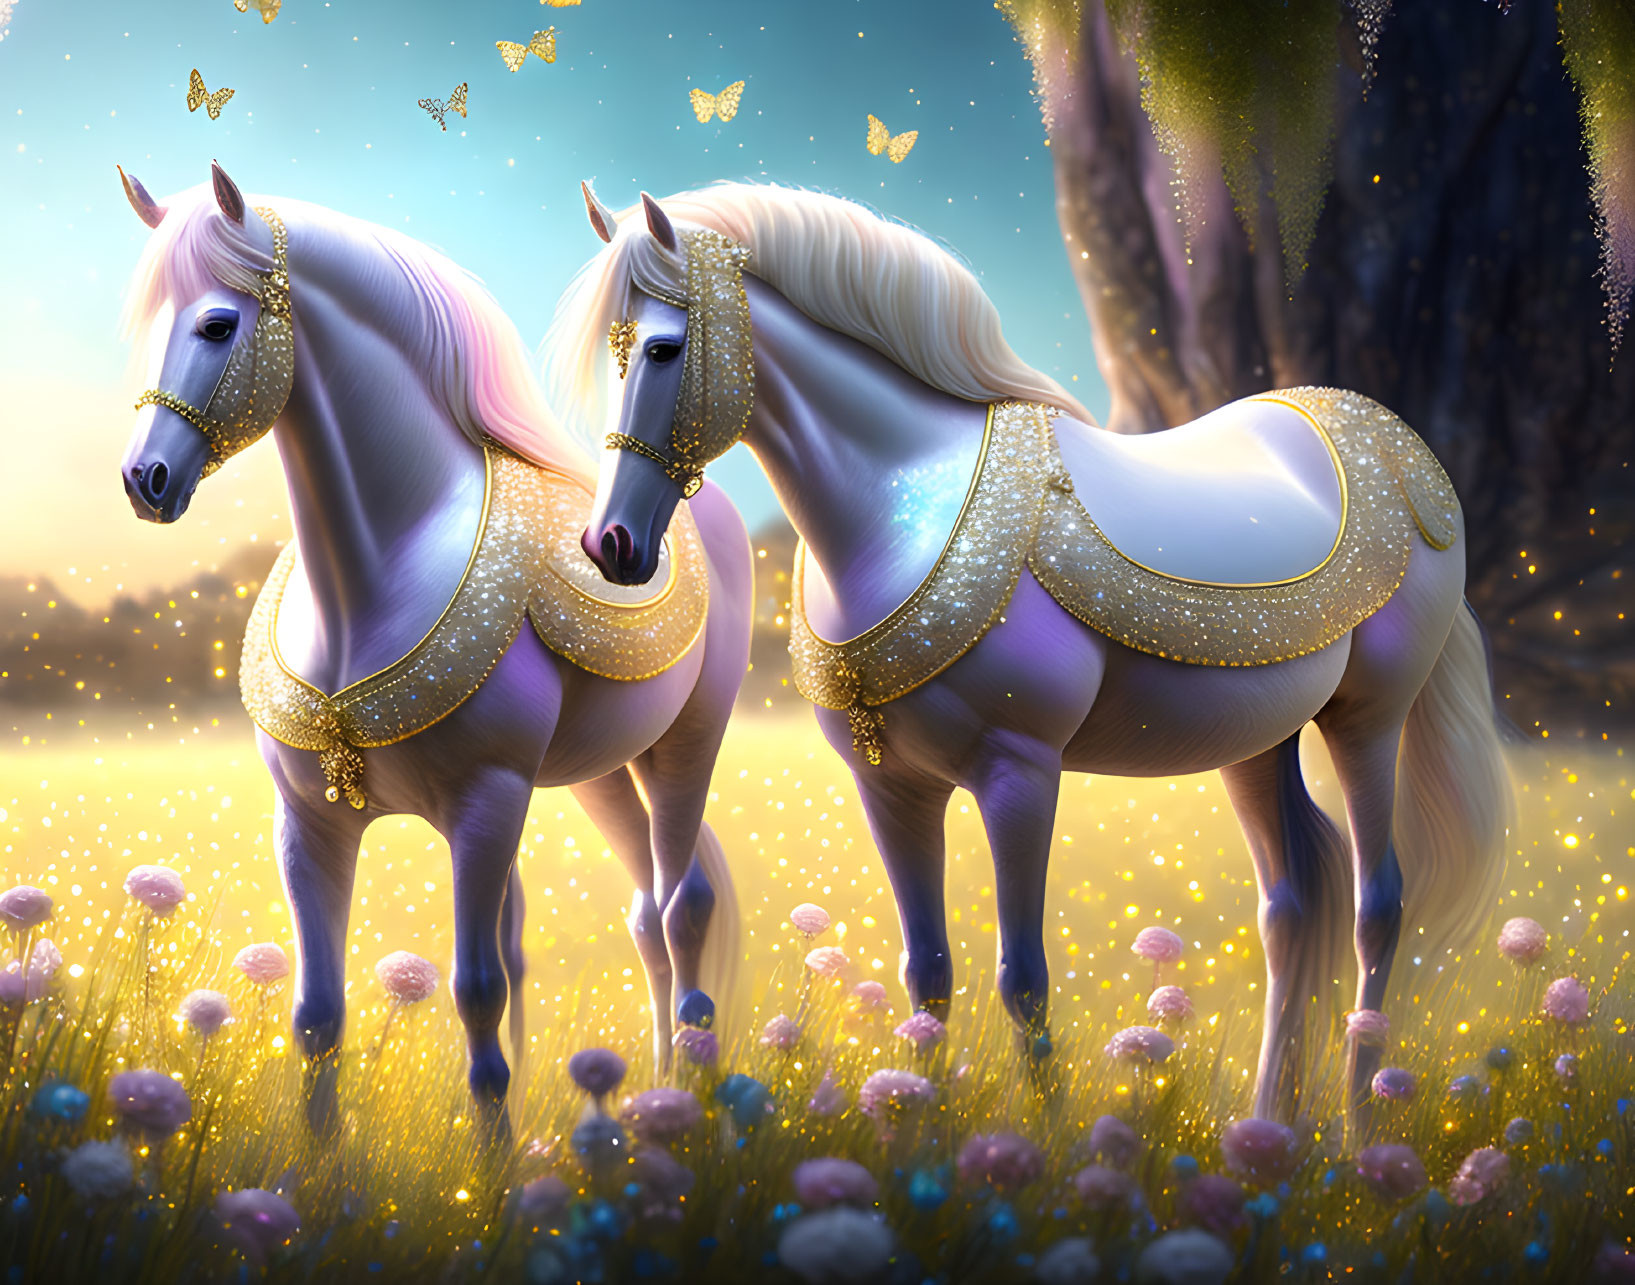 Mythical white horses with golden manes in enchanting meadow